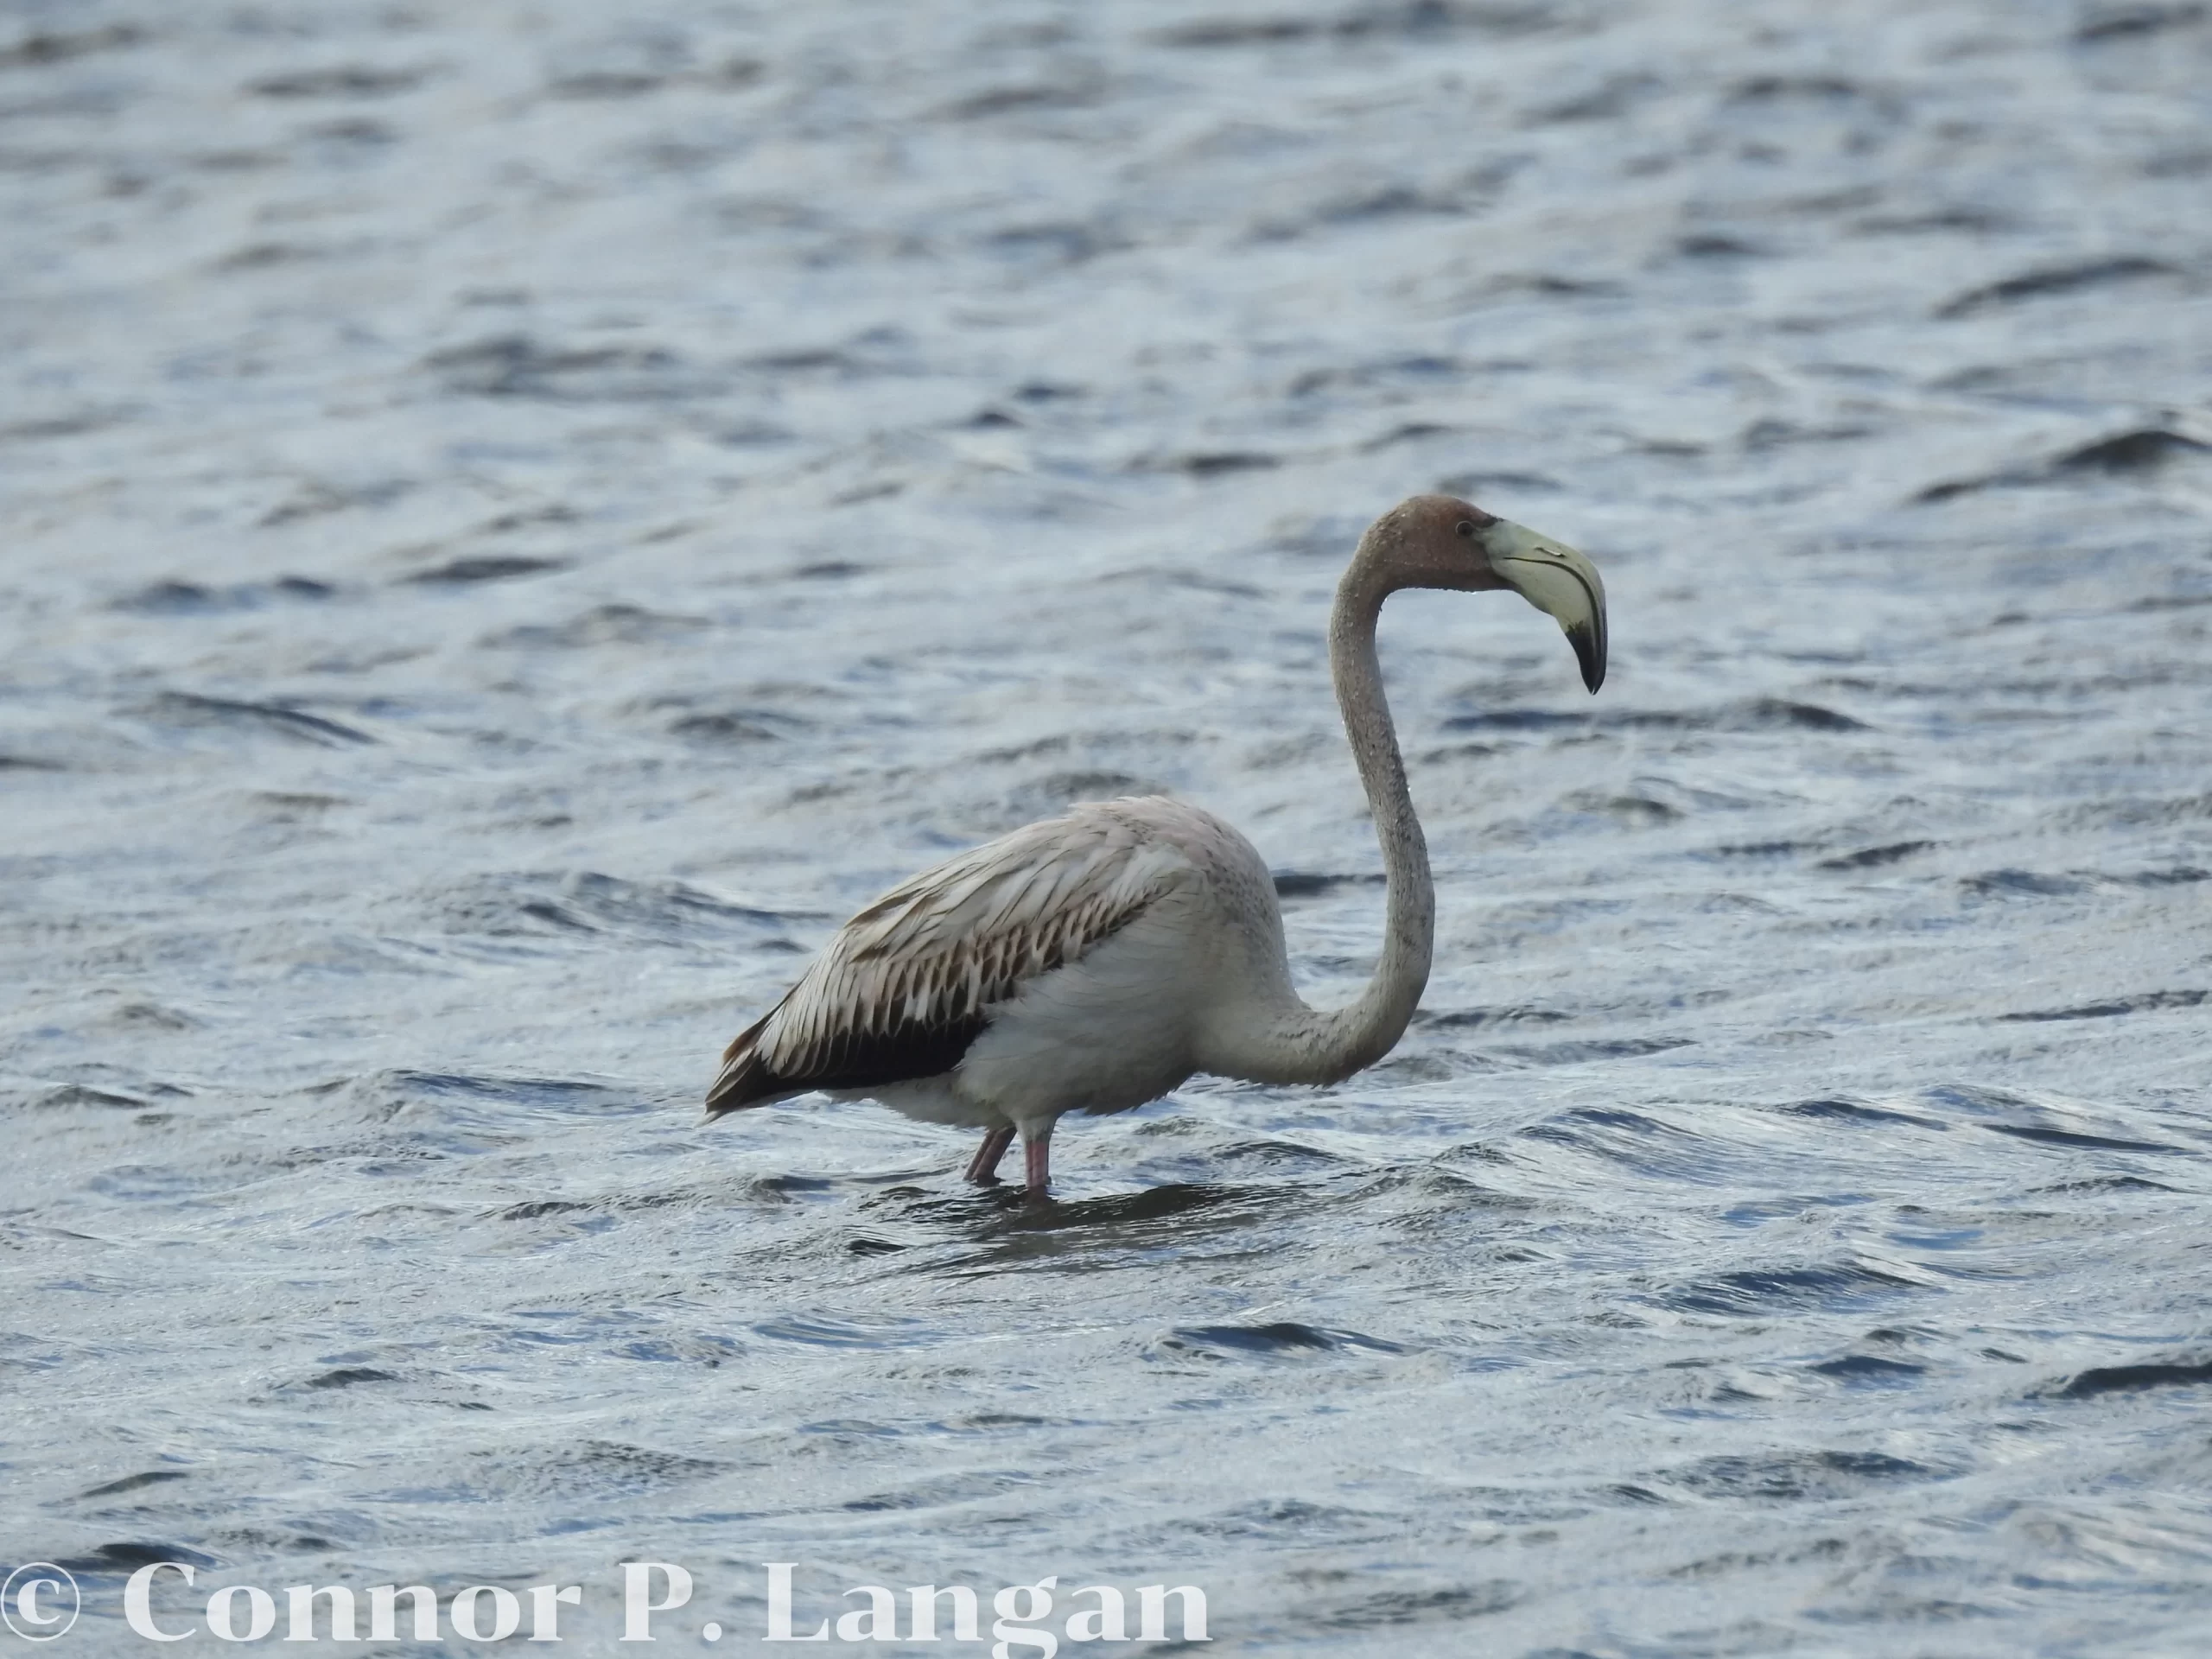 An immature American Flamingo stands in a lake.